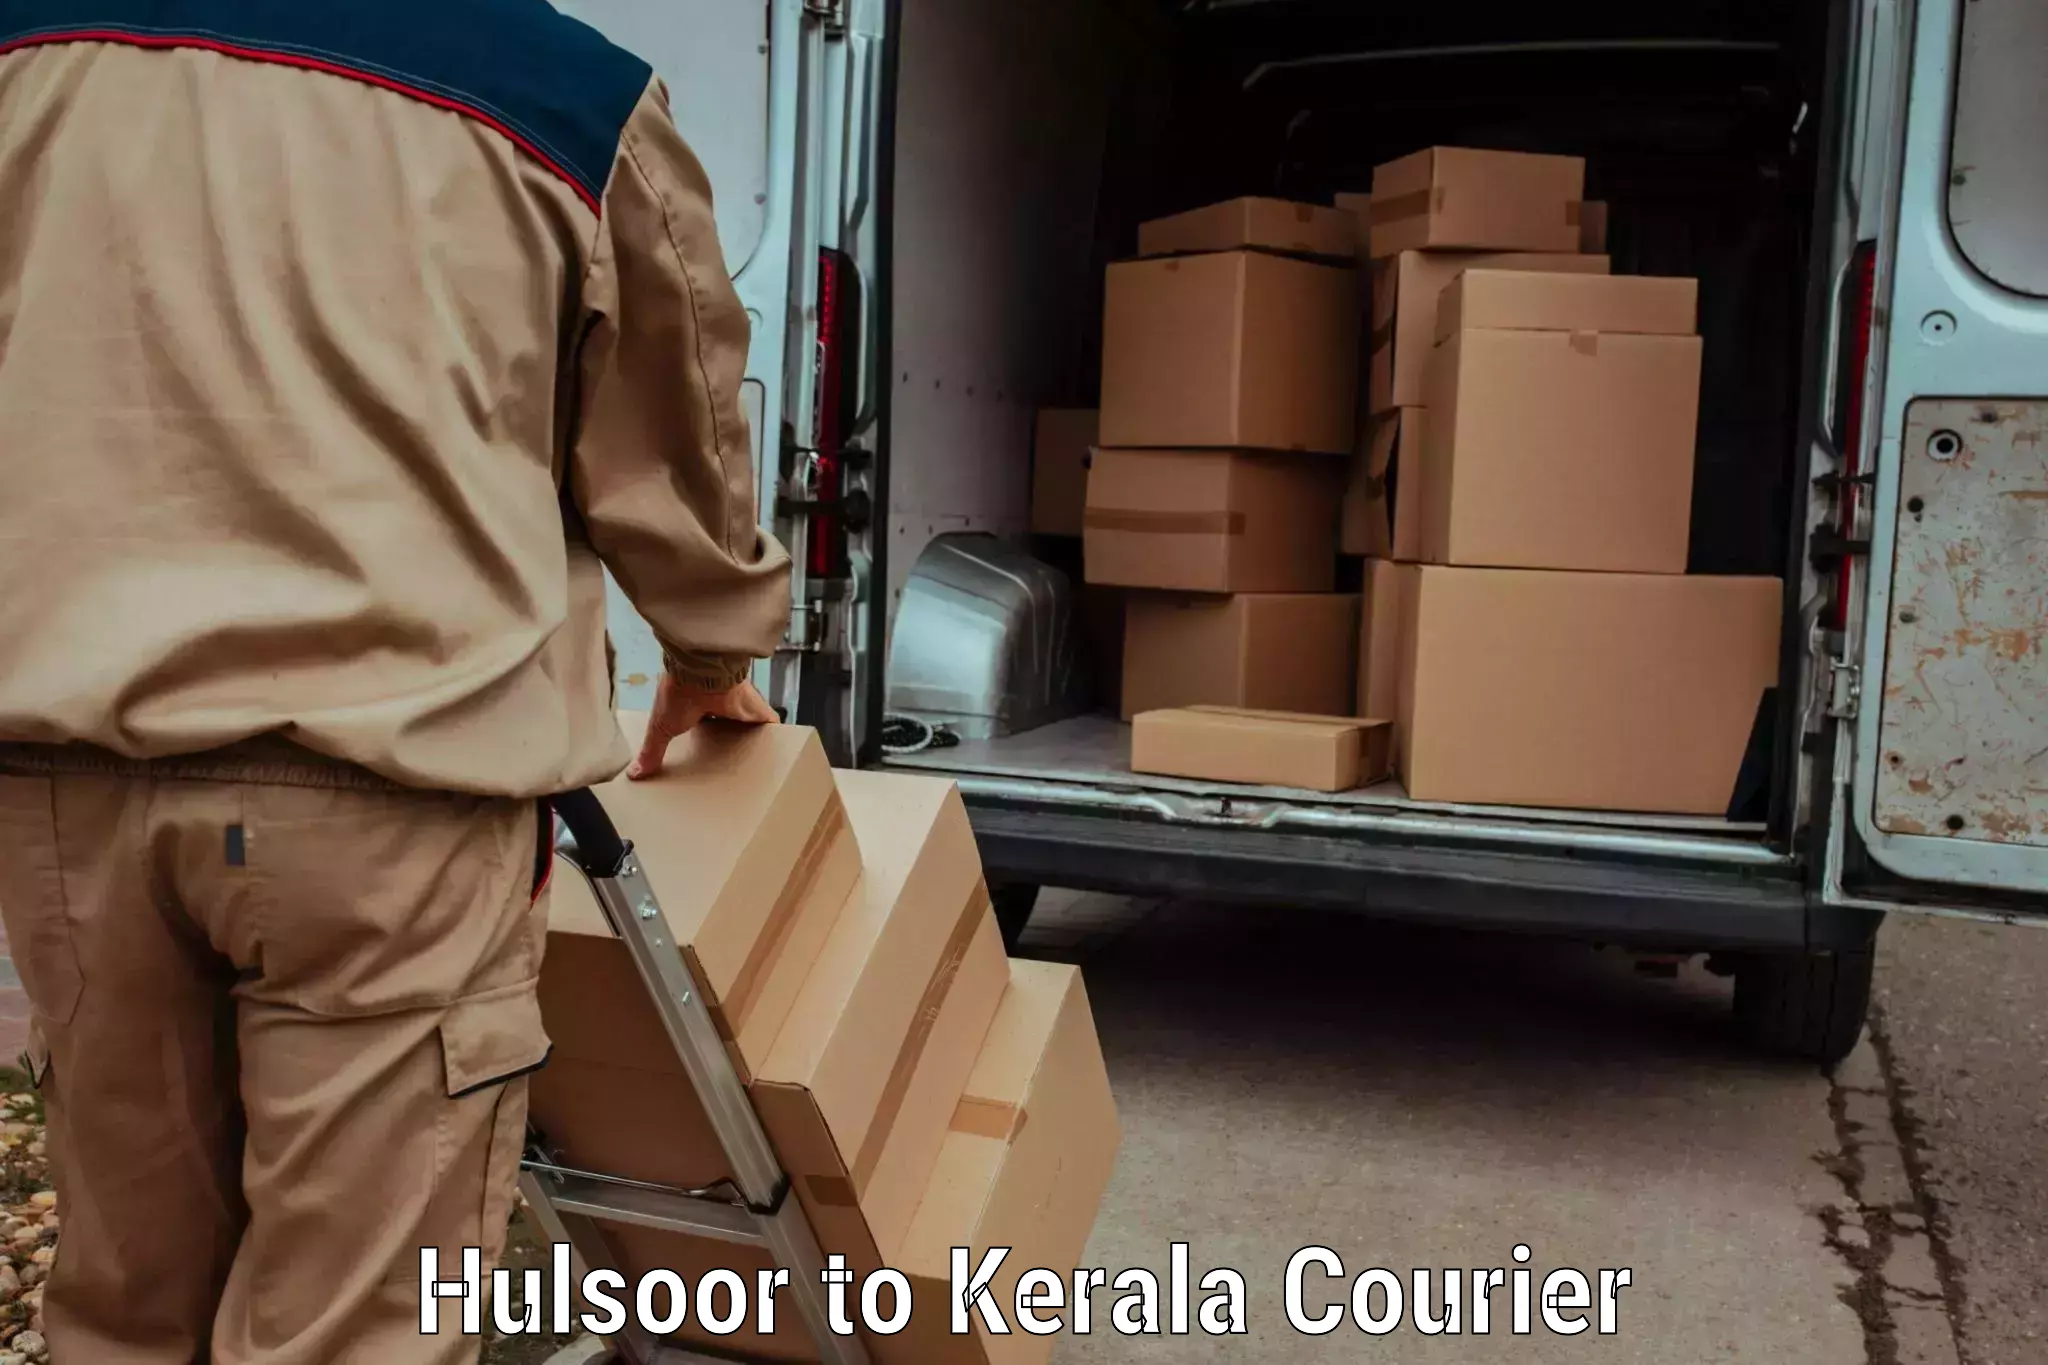 Reliable delivery network Hulsoor to Adimali